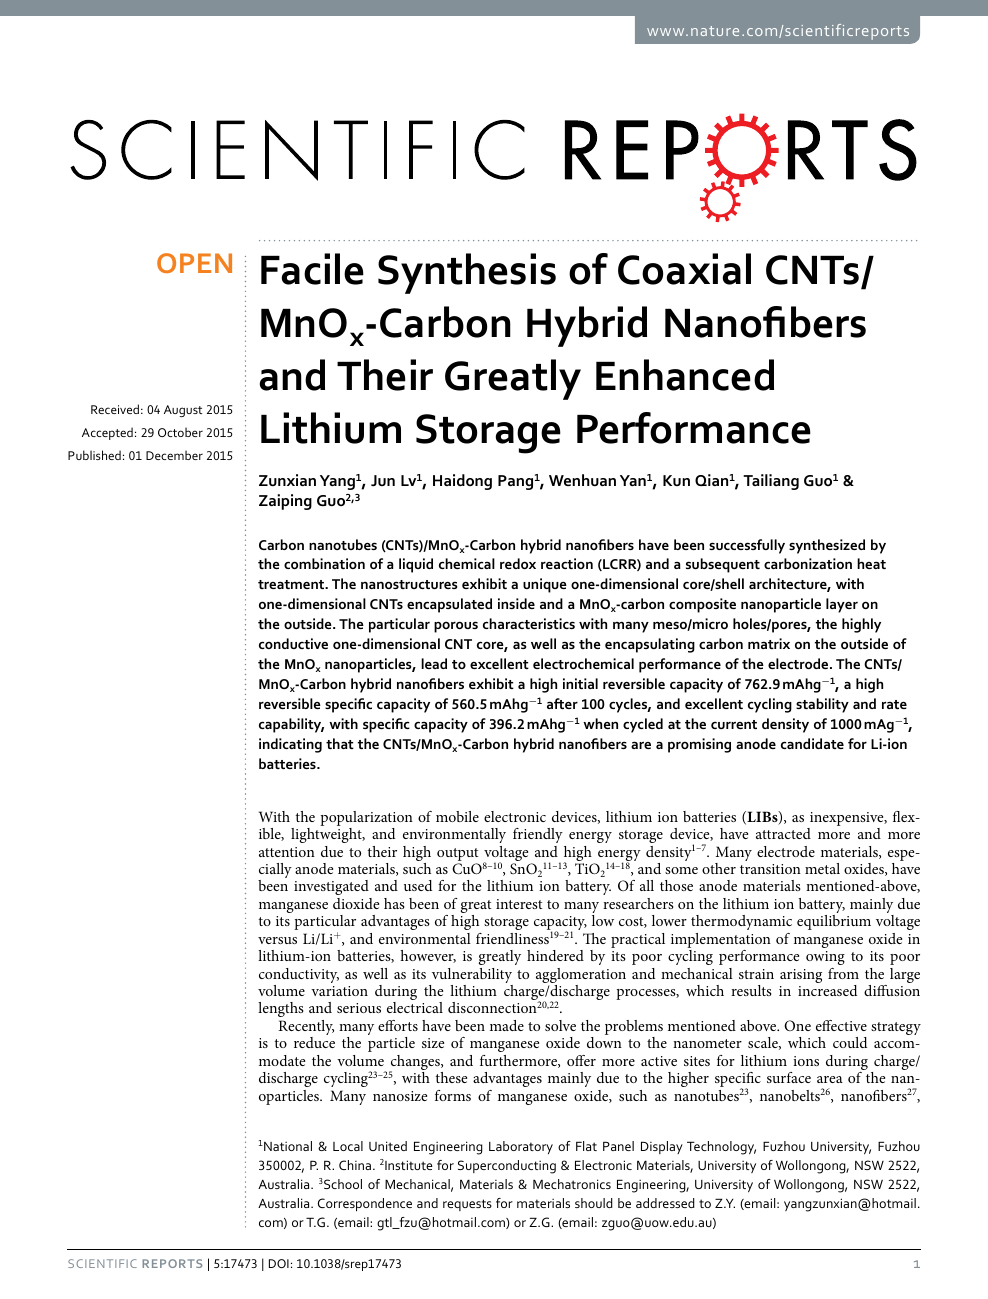 Facile Synthesis Of Coaxial Cnts Mnox Carbon Hybrid Nanofibers And Their Greatly Enhanced Lithium Storage Performance Topic Of Research Paper In Nano Technology Download Scholarly Article Pdf And Read For Free On Cyberleninka Open